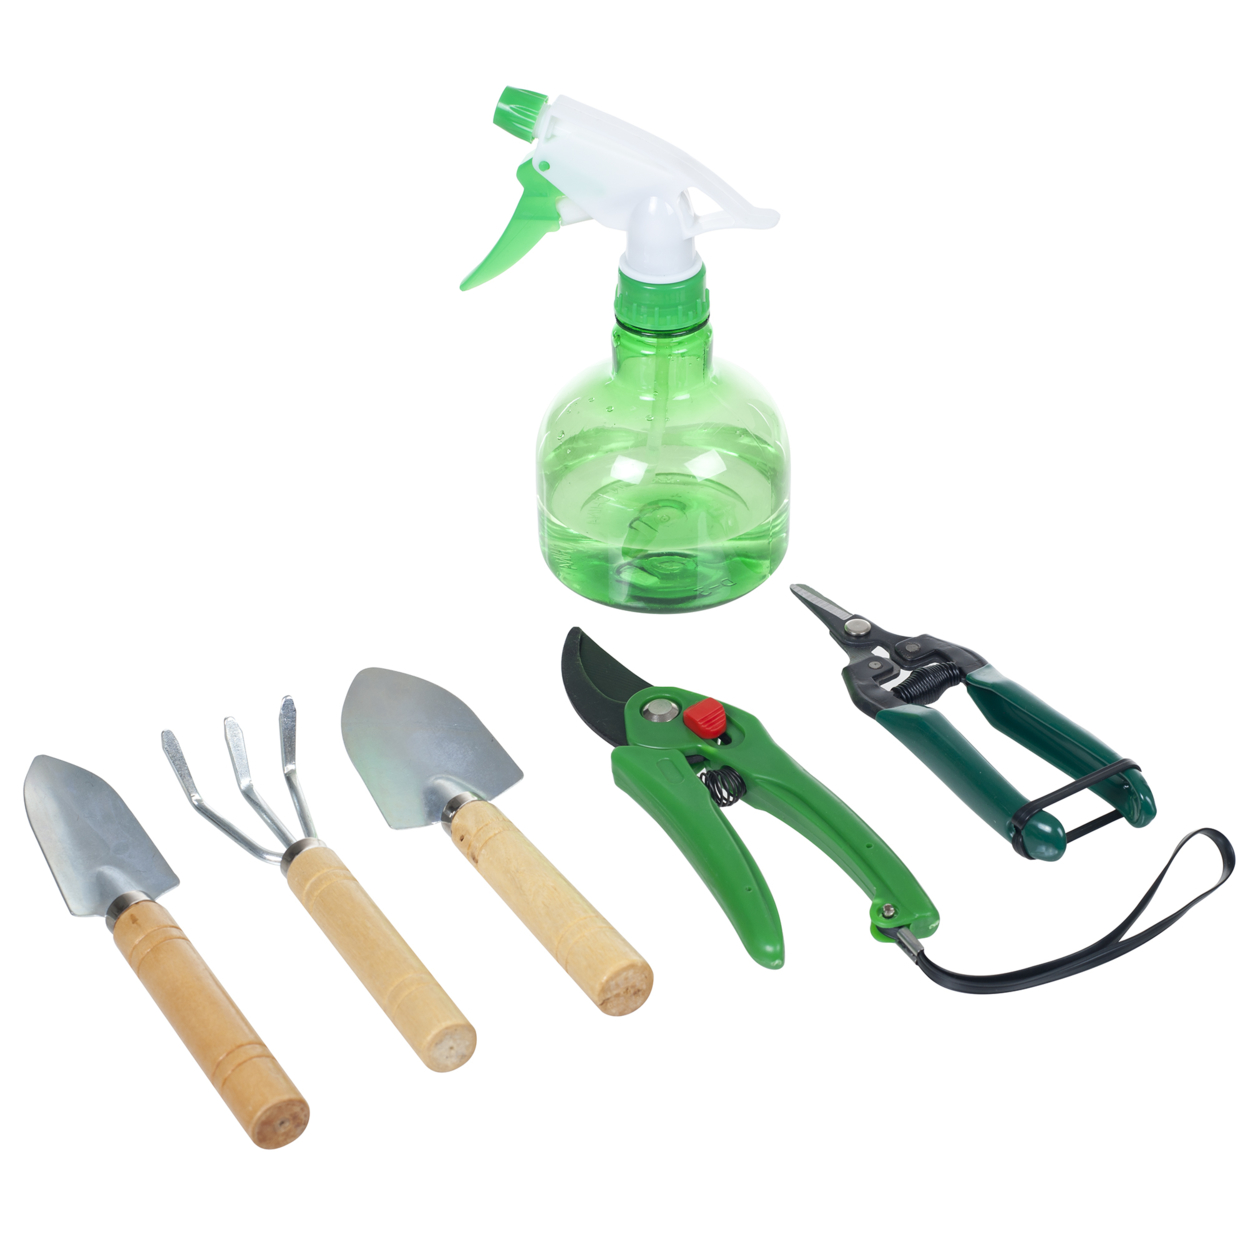 Small 7 Piece Indoor Garden Tool Set For House Plants Mini Tools Spray Bottle